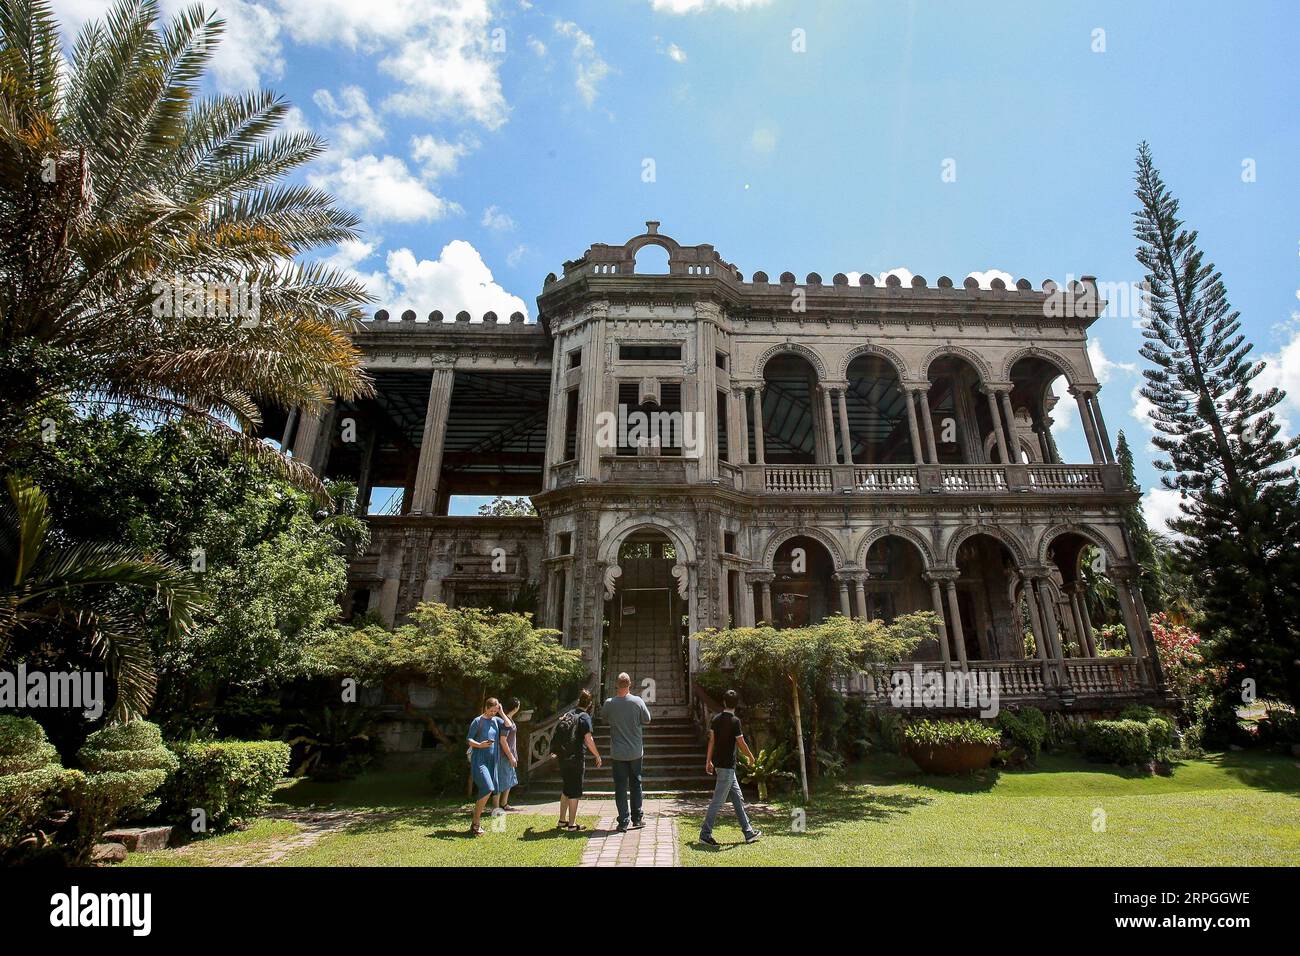 191016 -- TALISAY CITY, Oct. 16, 2019 -- People visit a tourist spot called The Ruins in Talisay City, the Philippines, Oct. 16, 2019.  PHILIPPINES-TALISAY CITY-TOURIST SPOT-THE RUINS ROUELLExUMALI PUBLICATIONxNOTxINxCHN Stock Photo